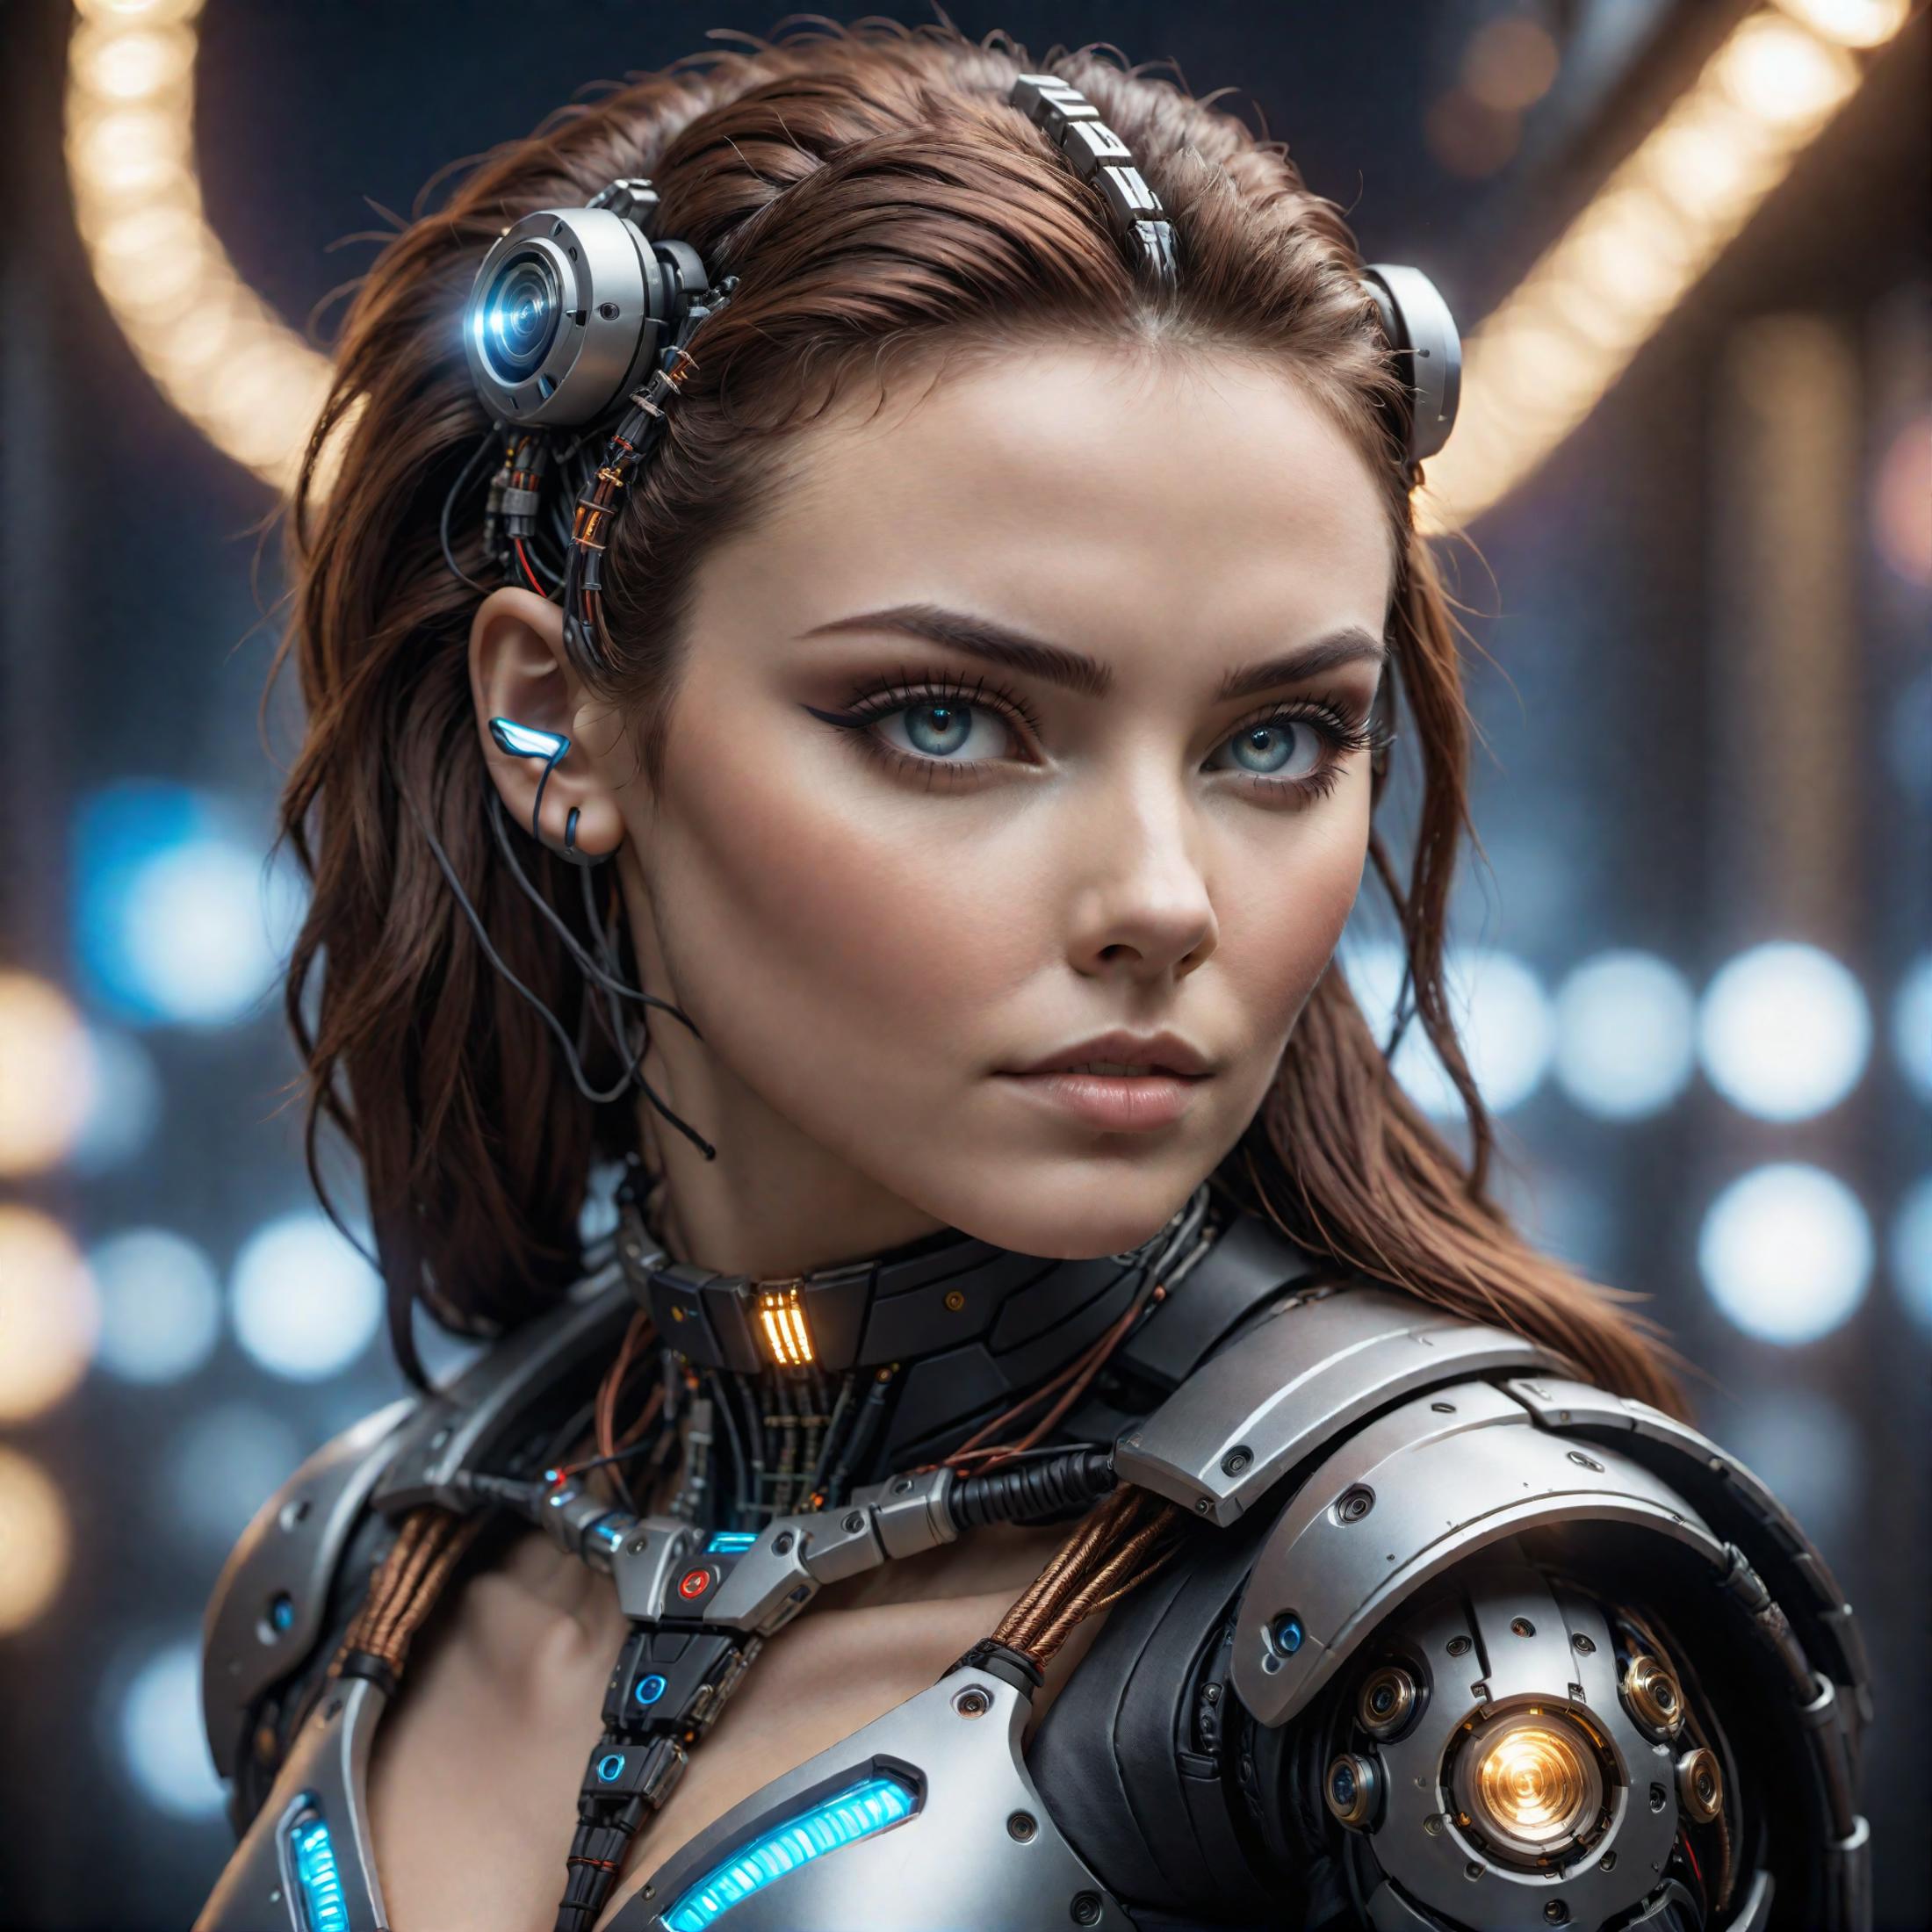 A computer-generated image of a woman with blue eyes and a metal armor headpiece.